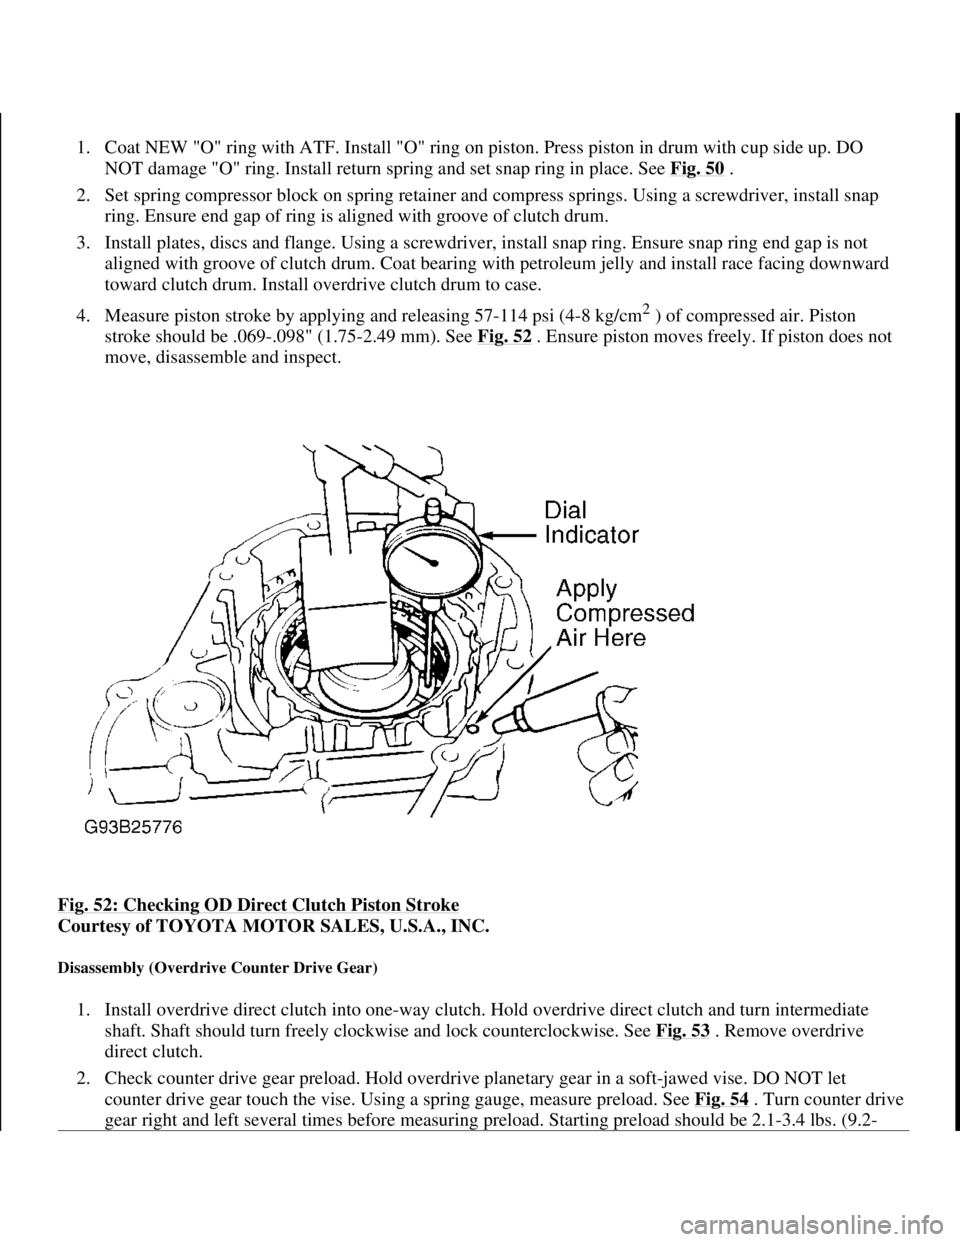 TOYOTA RAV4 1996  Service Repair Manual 1. Coat NEW "O" ring with ATF. Install "O" ring on piston. Press piston in drum with cup side up. DO 
NOT damage "O" ring. Install return spring and set snap ring in place. See Fig. 50
 .  
2. Set spr